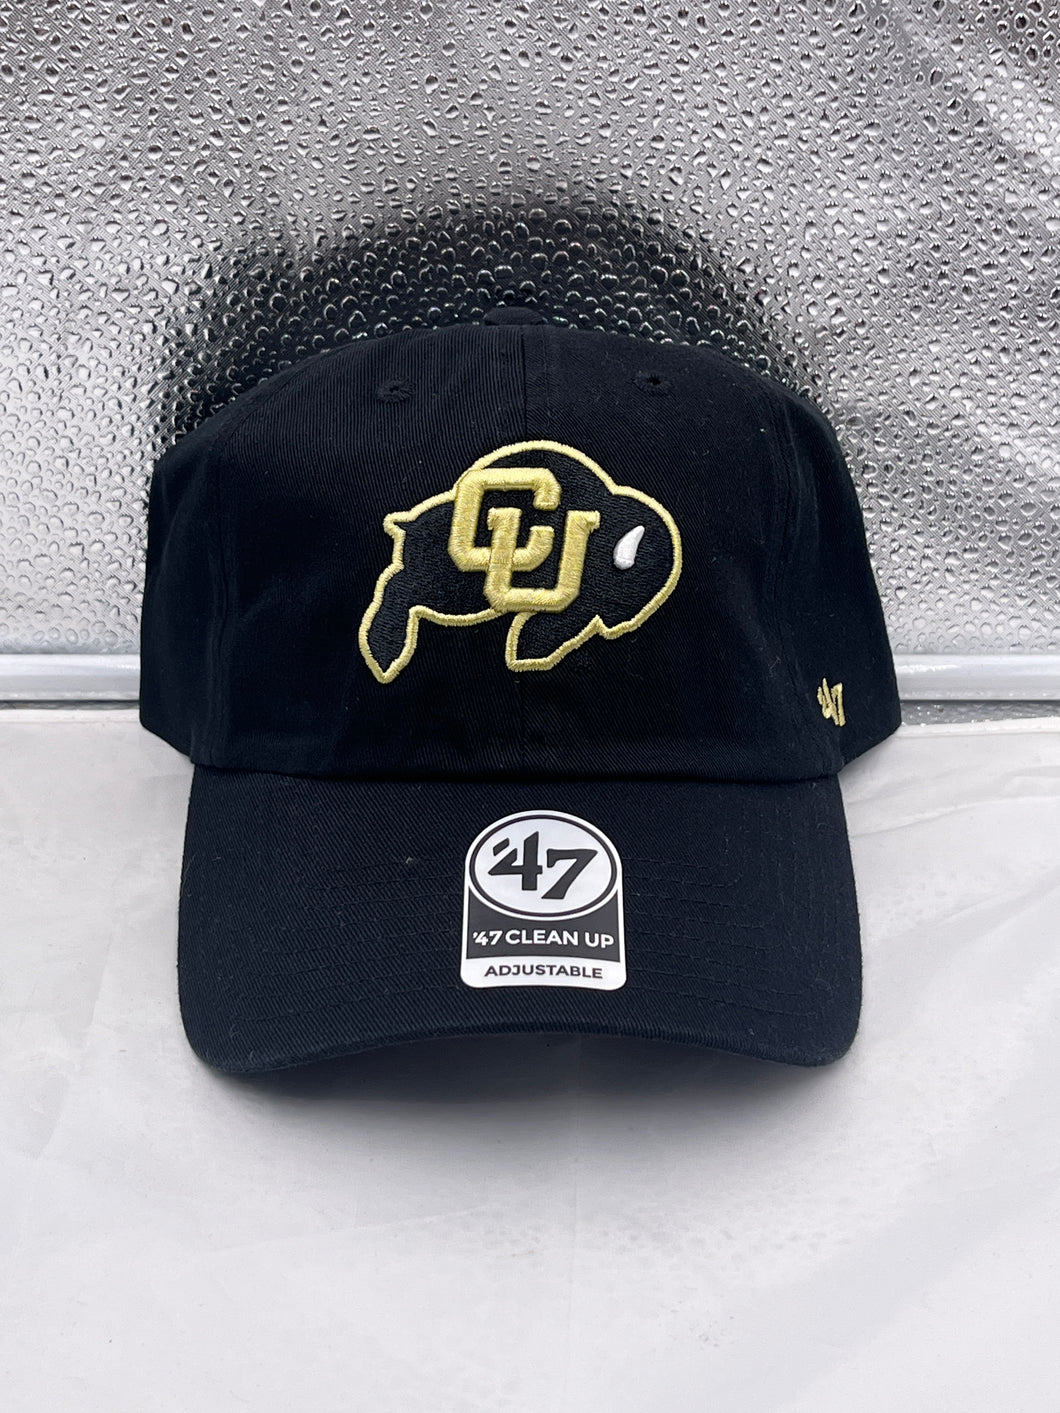 Colorado Buffaloes NCAA '47 Black Clean Up Adjustable Strapback Hat - Casey's Sports Store